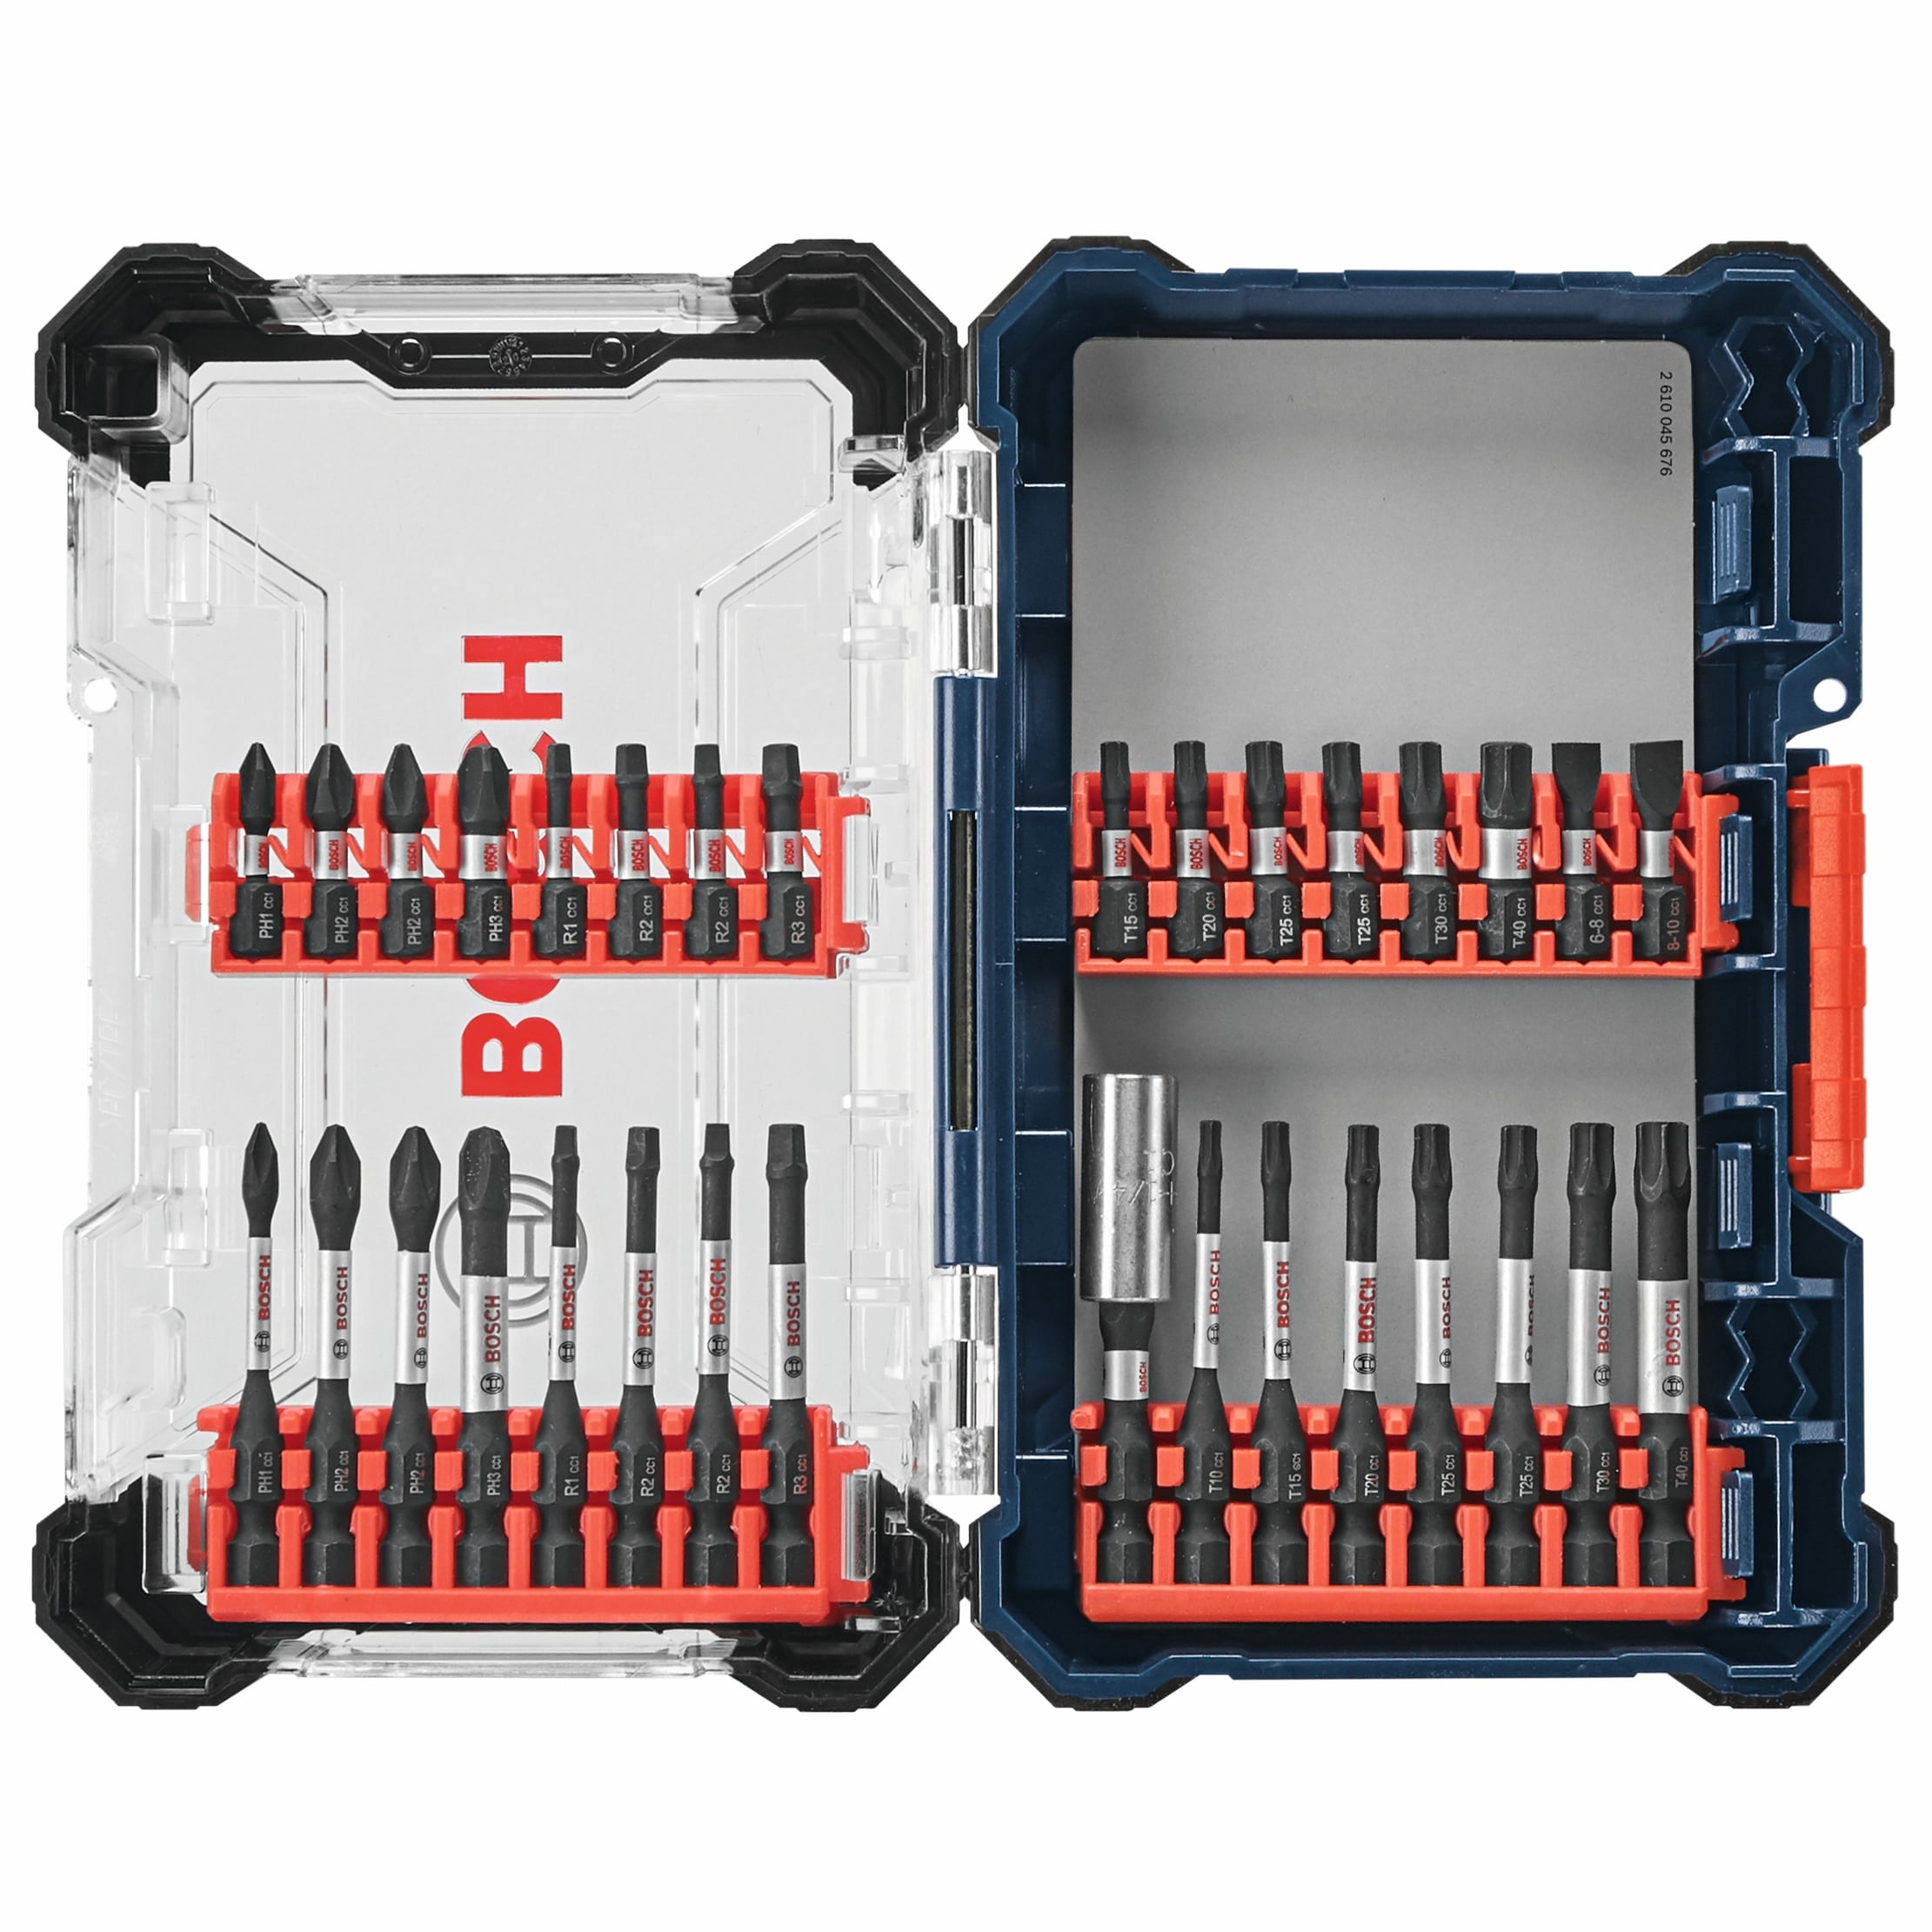 Bosch (32-Piece) Bit Impact in Driver department DrivenSet Driver Impact the Bits at